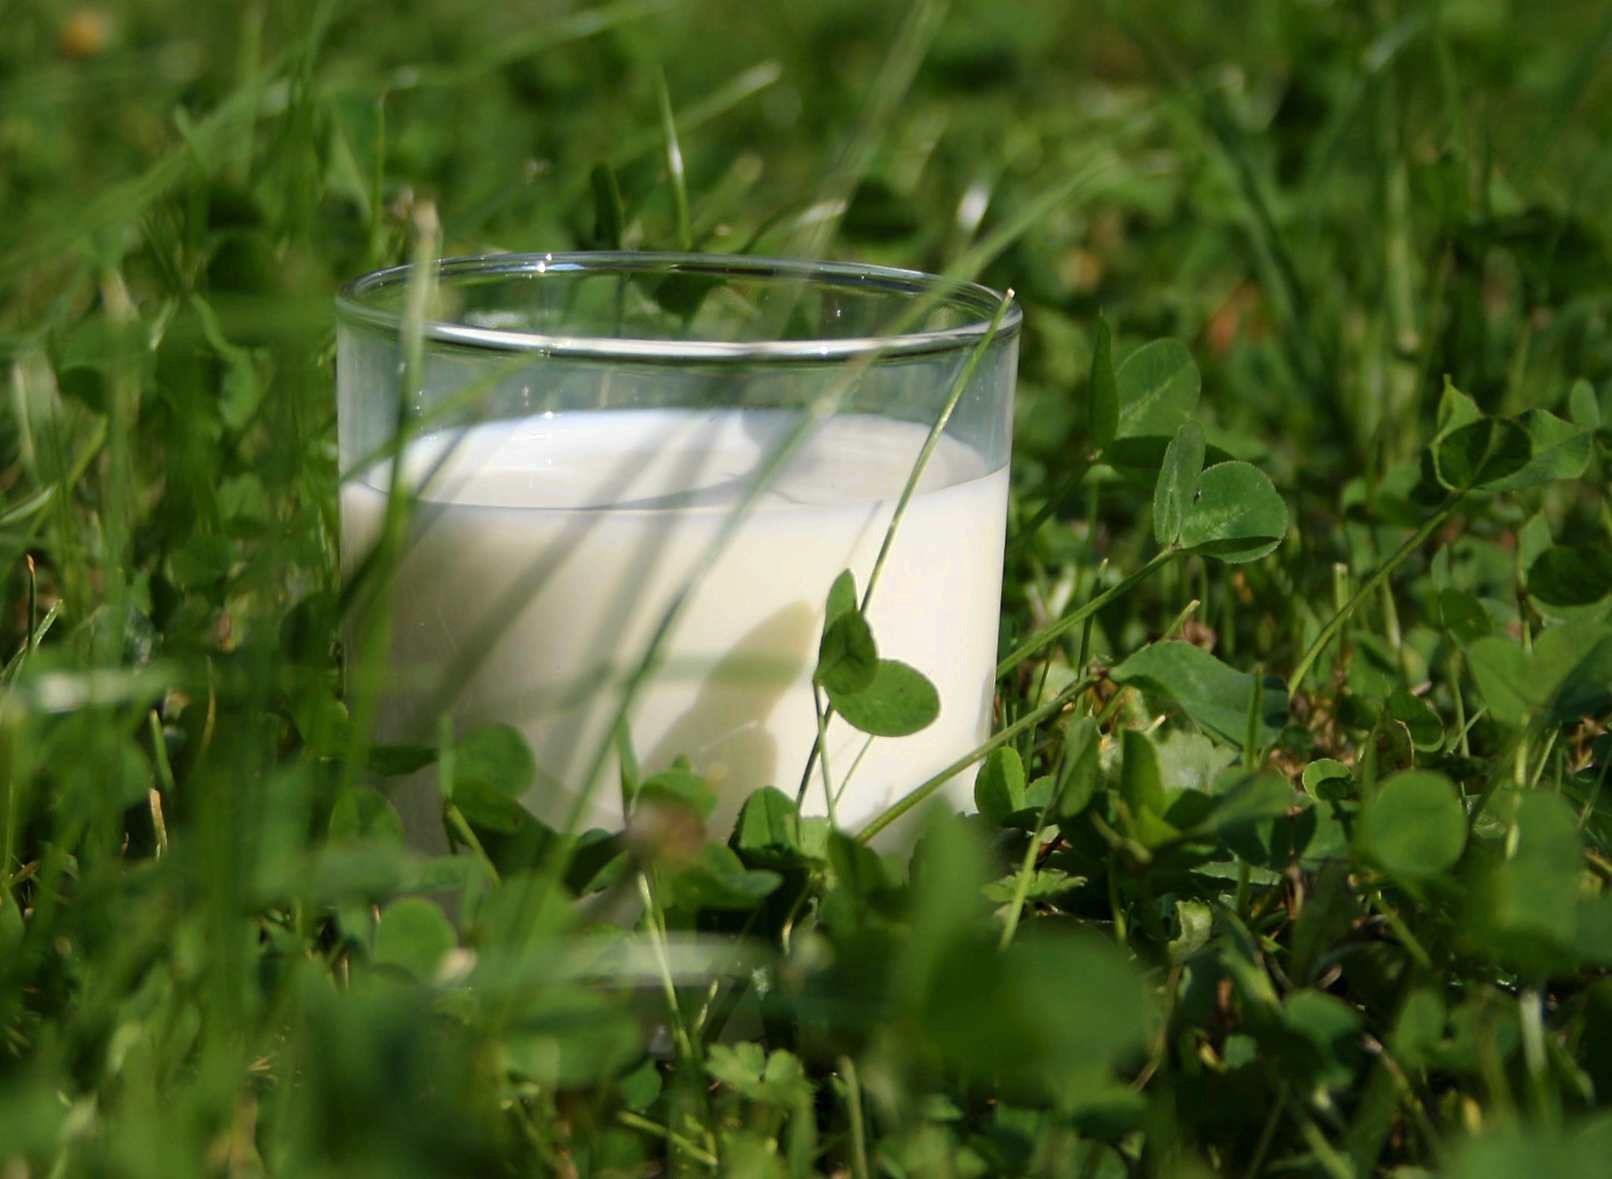 Arla Foods amba confirms unchanged March milk price